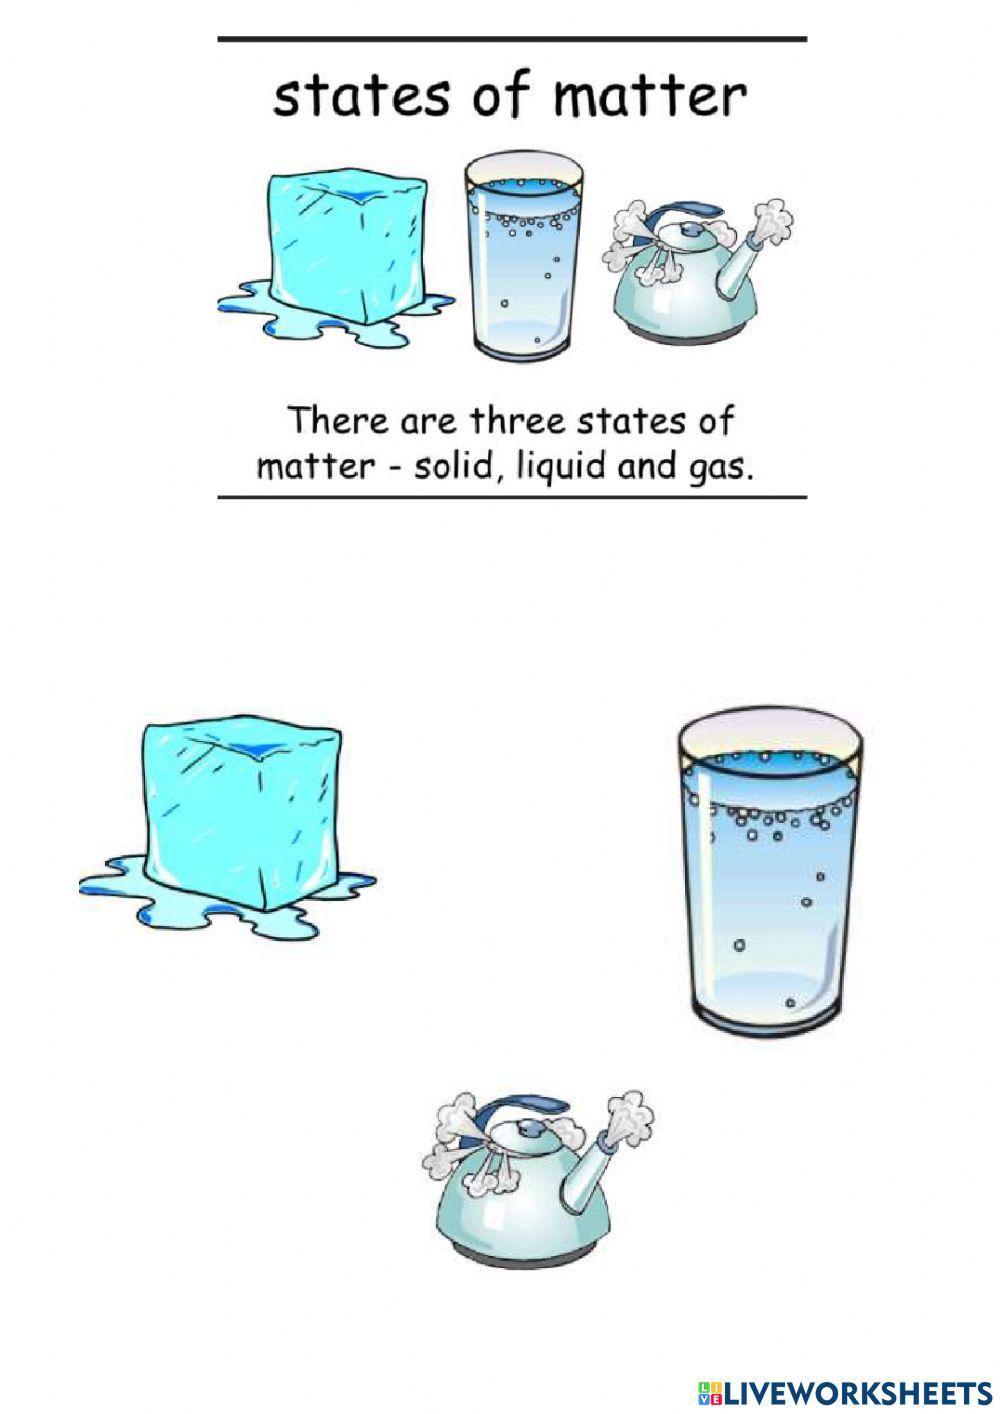 States of water